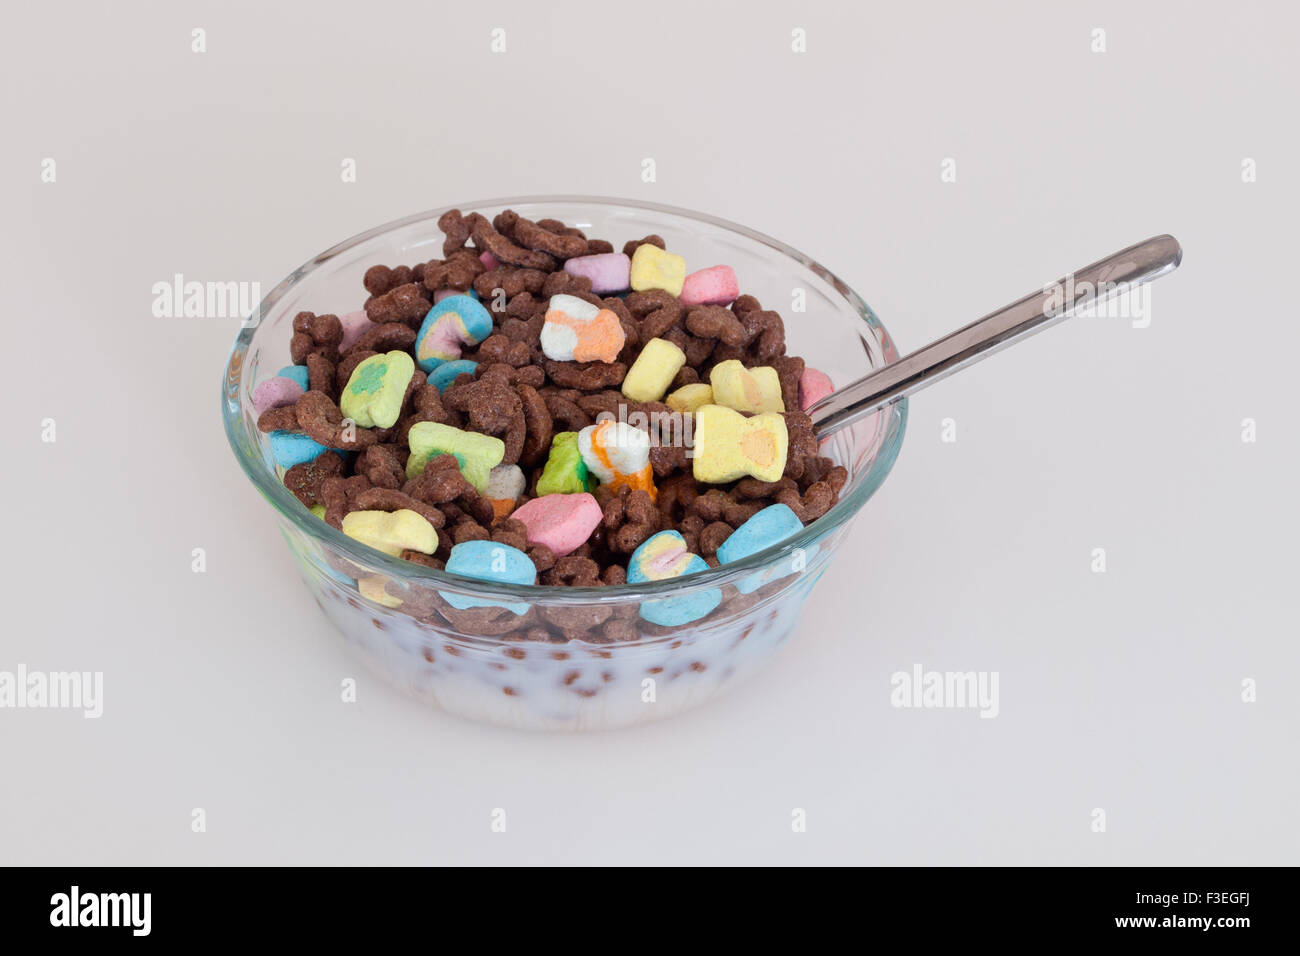 A bowl of Chocolate Lucky Charms cereal, produced by General Mills. Stock Photo